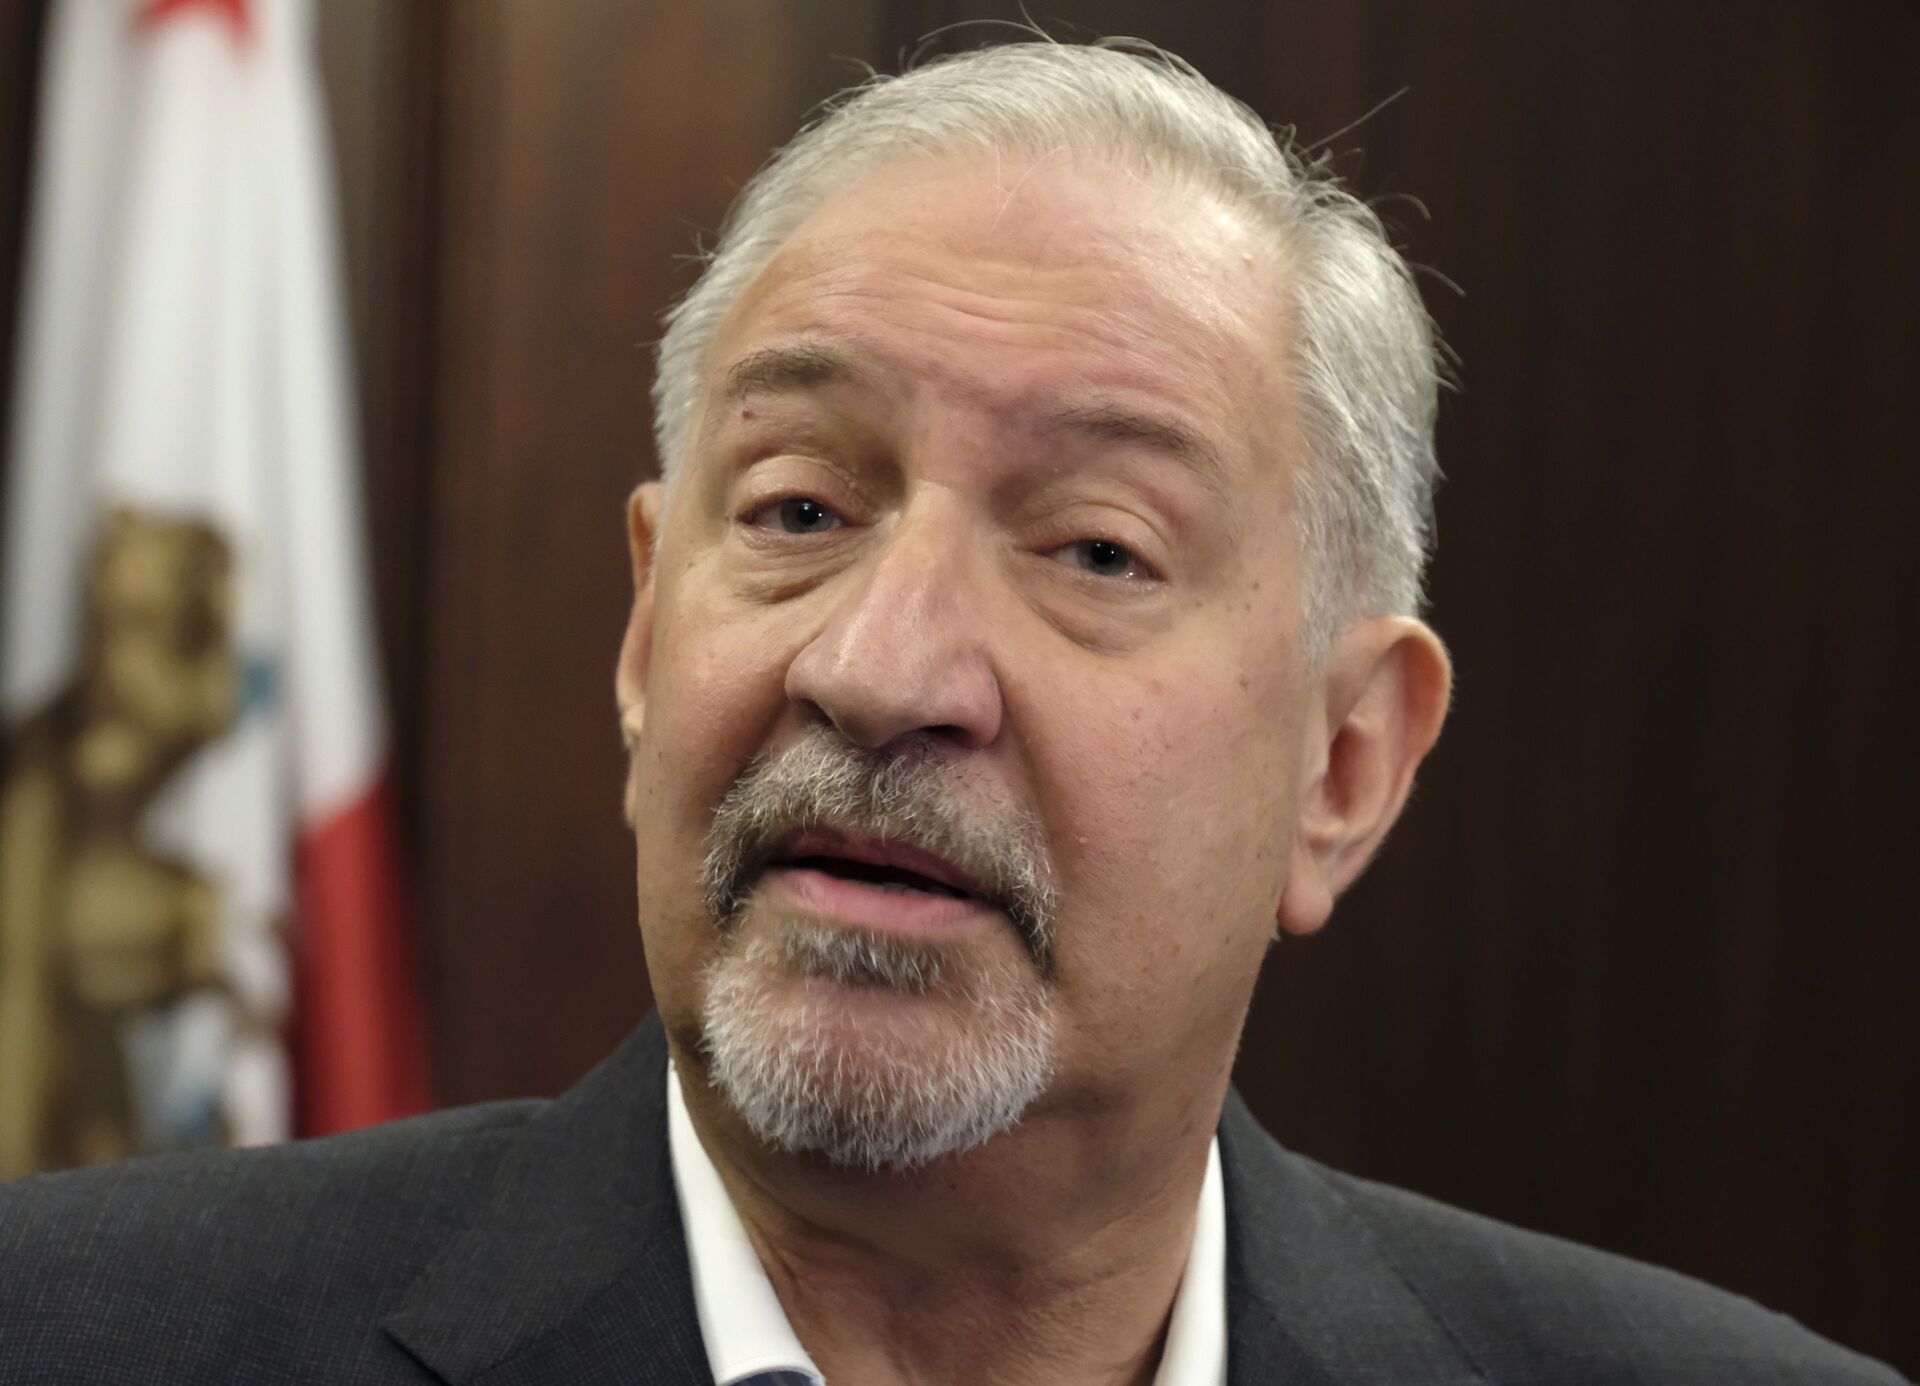 This Friday, Sept. 2, 2016 file photo shows attorney Mark Geragos talking to the media during a news conference in downtown Los Angeles. CNN has cut ties with Mark Geragos just hours after the celebrity attorney was named as a co-conspirator in a case accusing lawyer Michael Avenatti of trying to extort Nike. - Sputnik International, 1920, 07.09.2021